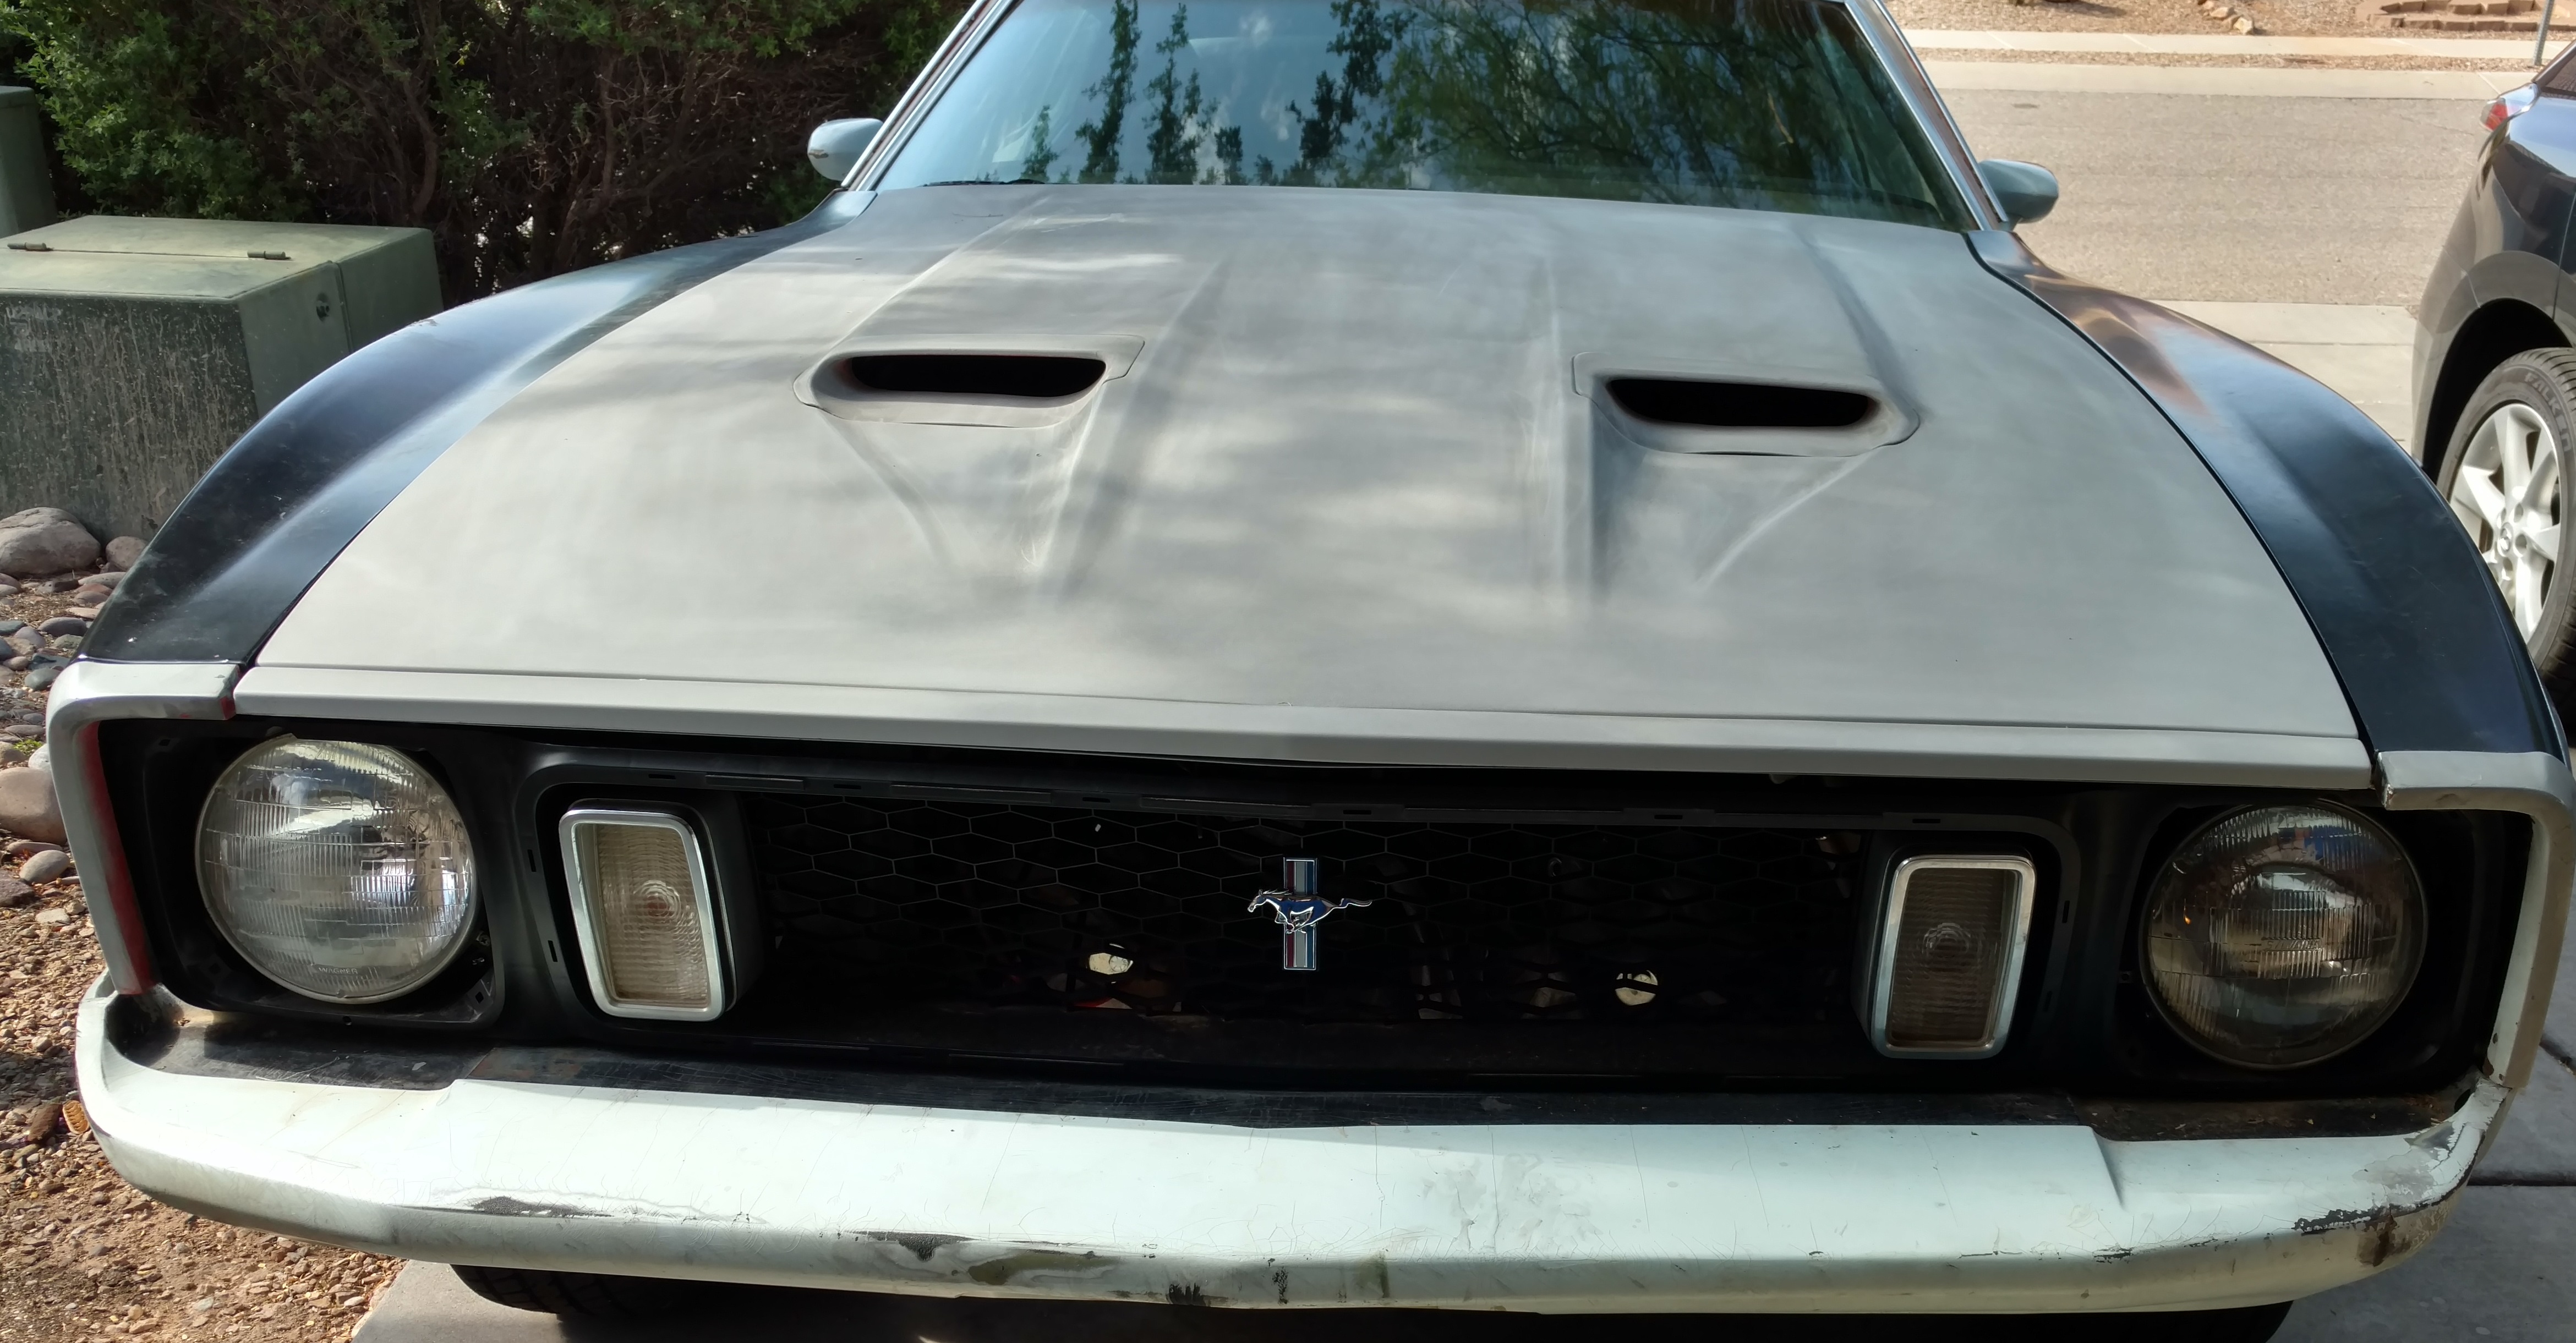 Update on Transmission for Project SportsRoof – ’73 Stang